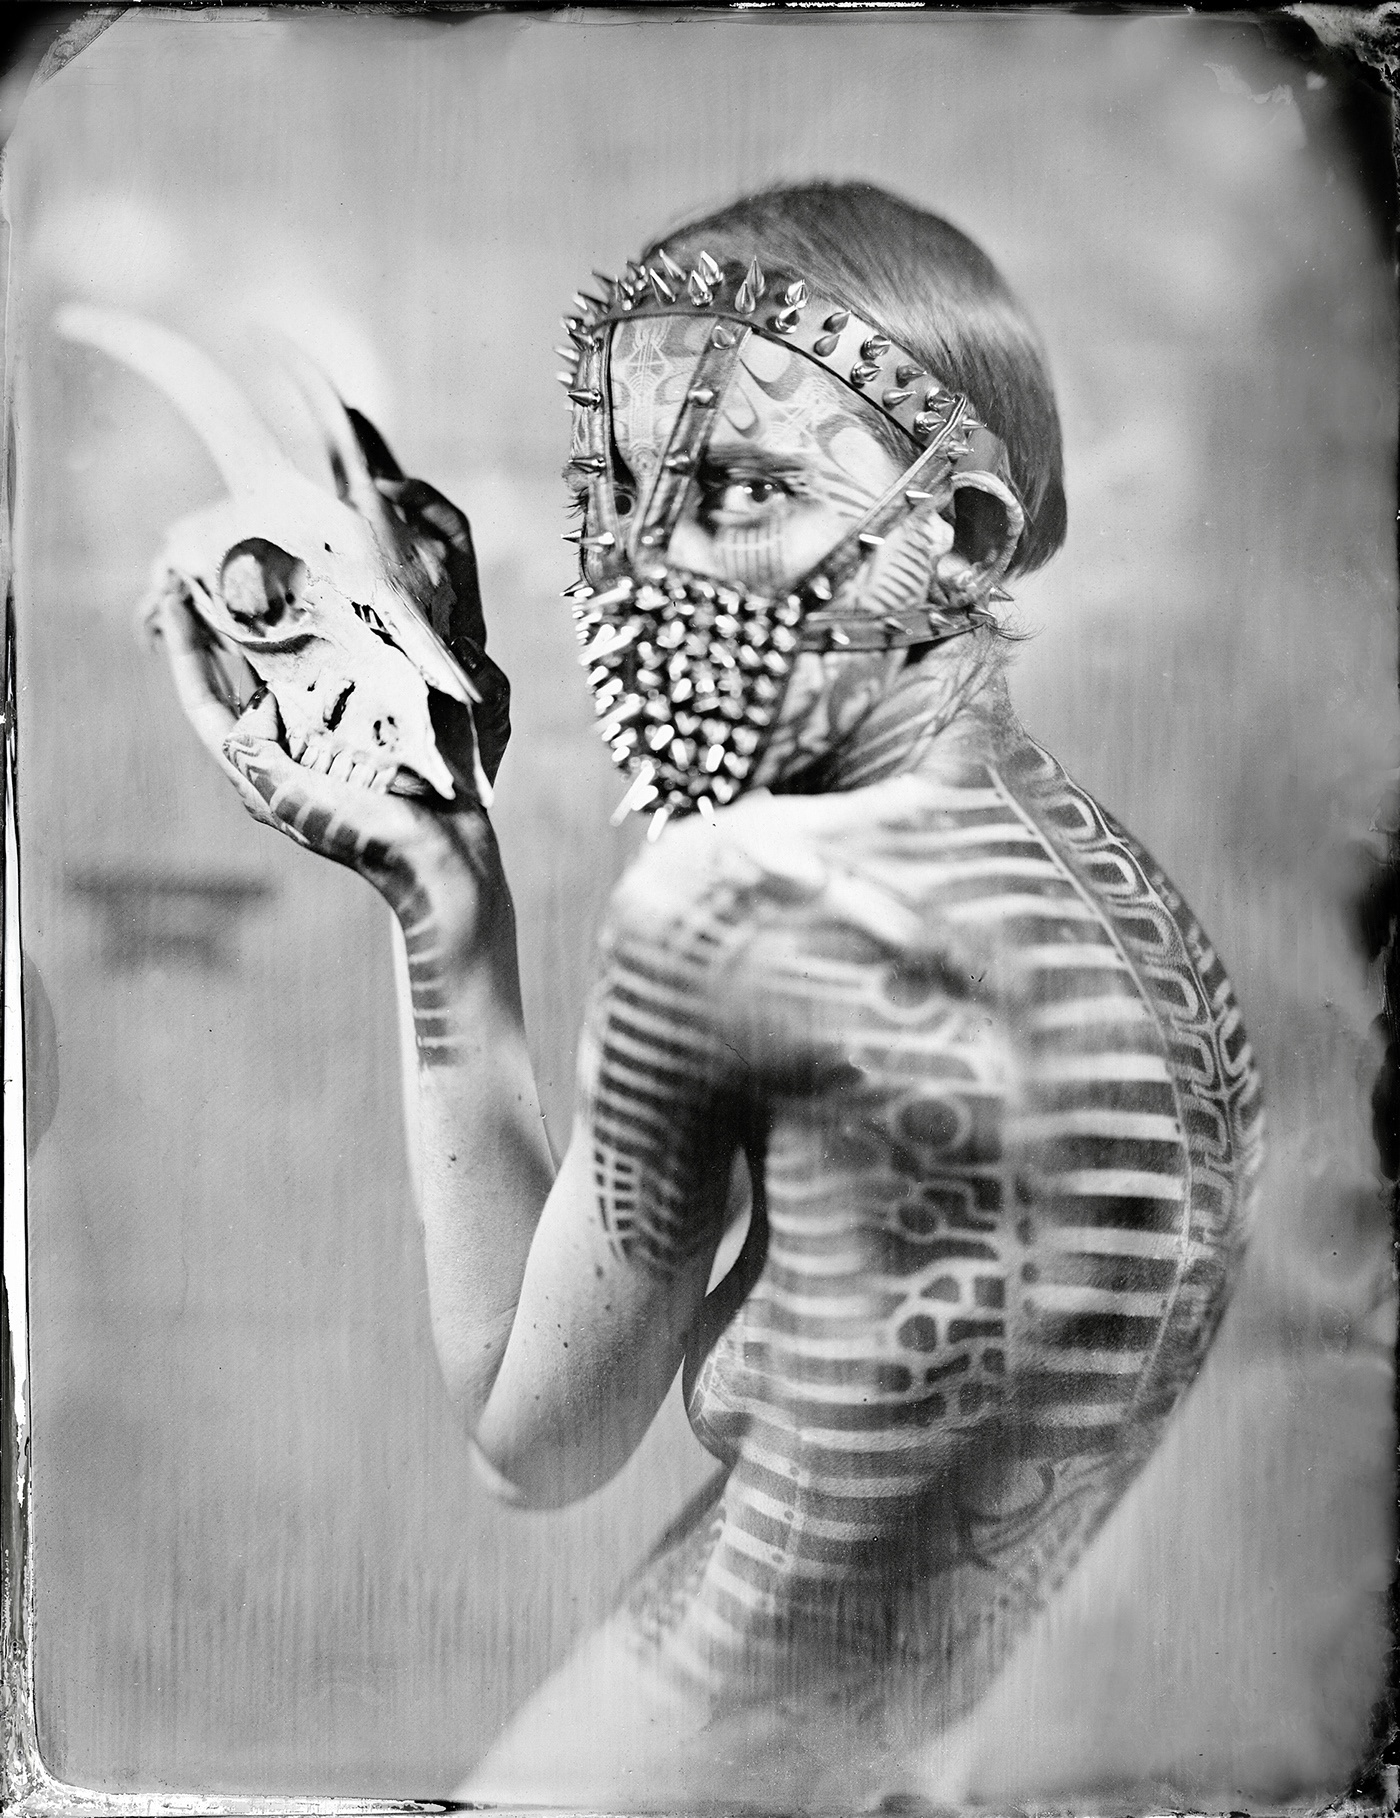 Collaboration with body painter Michael Rossner, 2013
